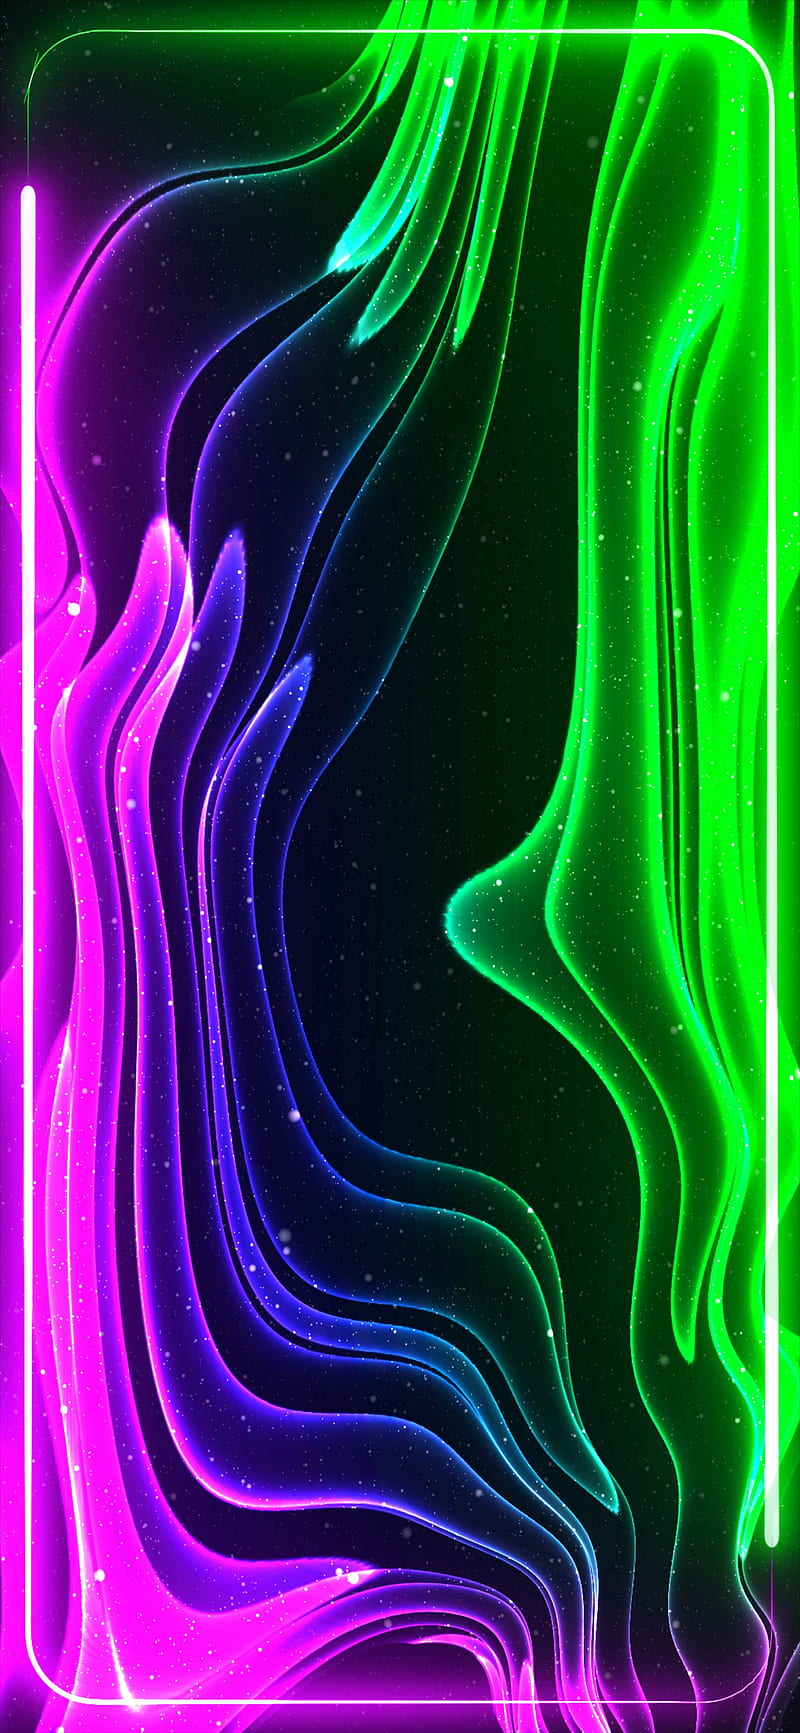 https://w0.peakpx.com/wallpaper/228/126/HD-wallpaper-aurora-neon-frame-abstract-amoled-color-changing-colorful-glitter-glow-surreal.jpg